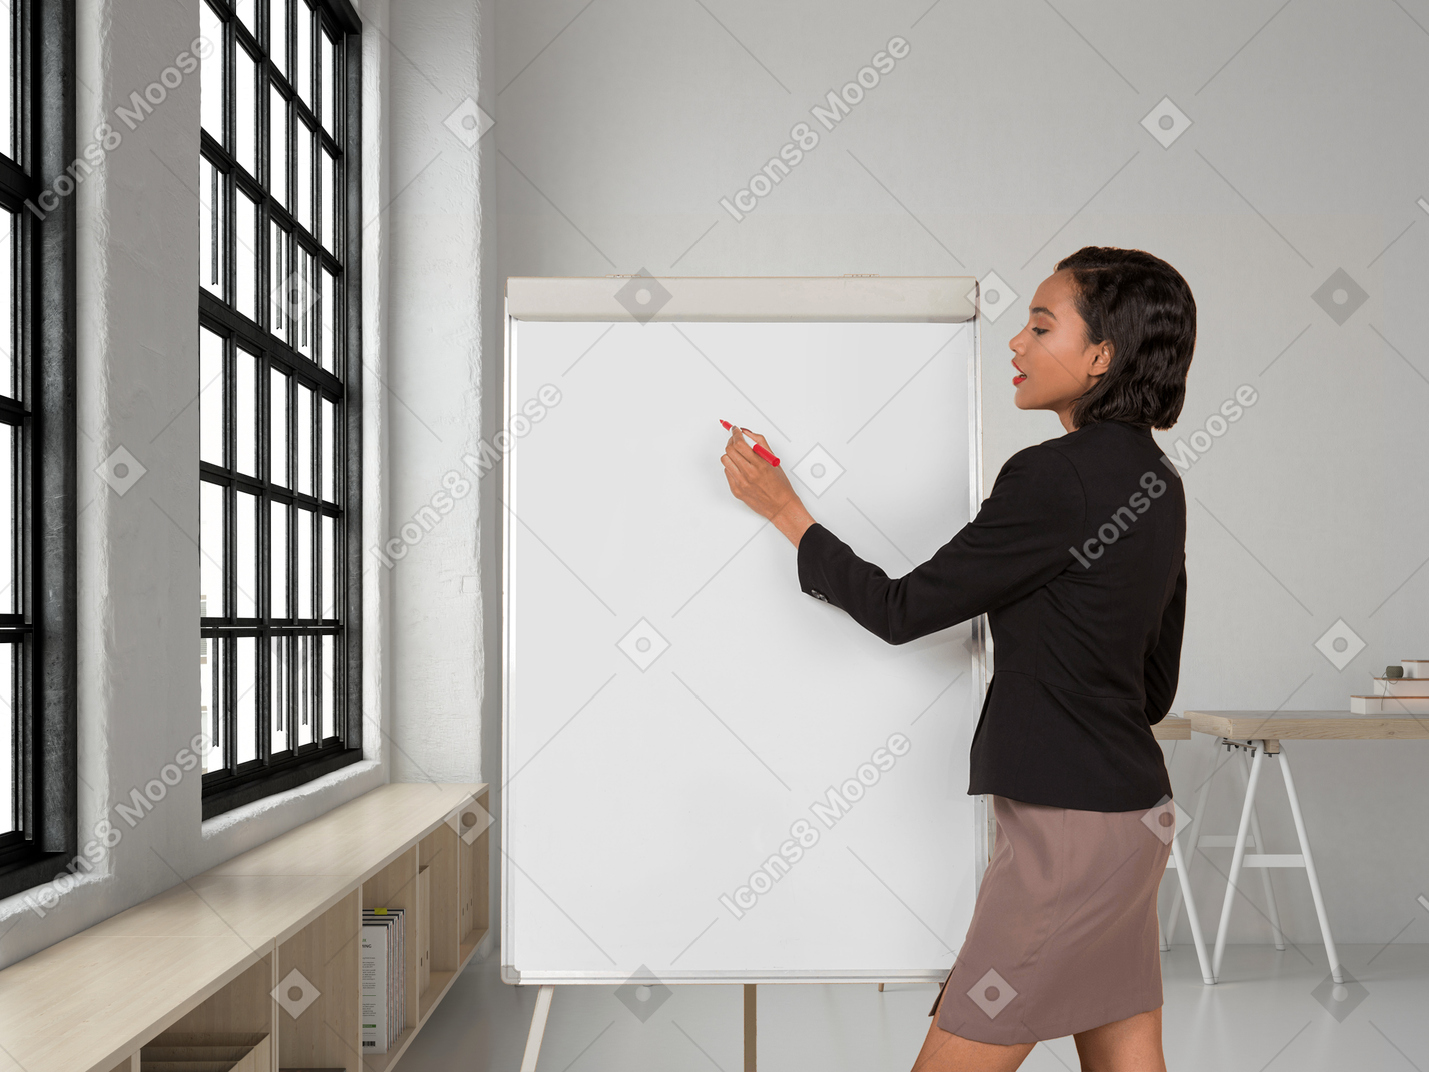 A business woman writing on a whiteboard in an office